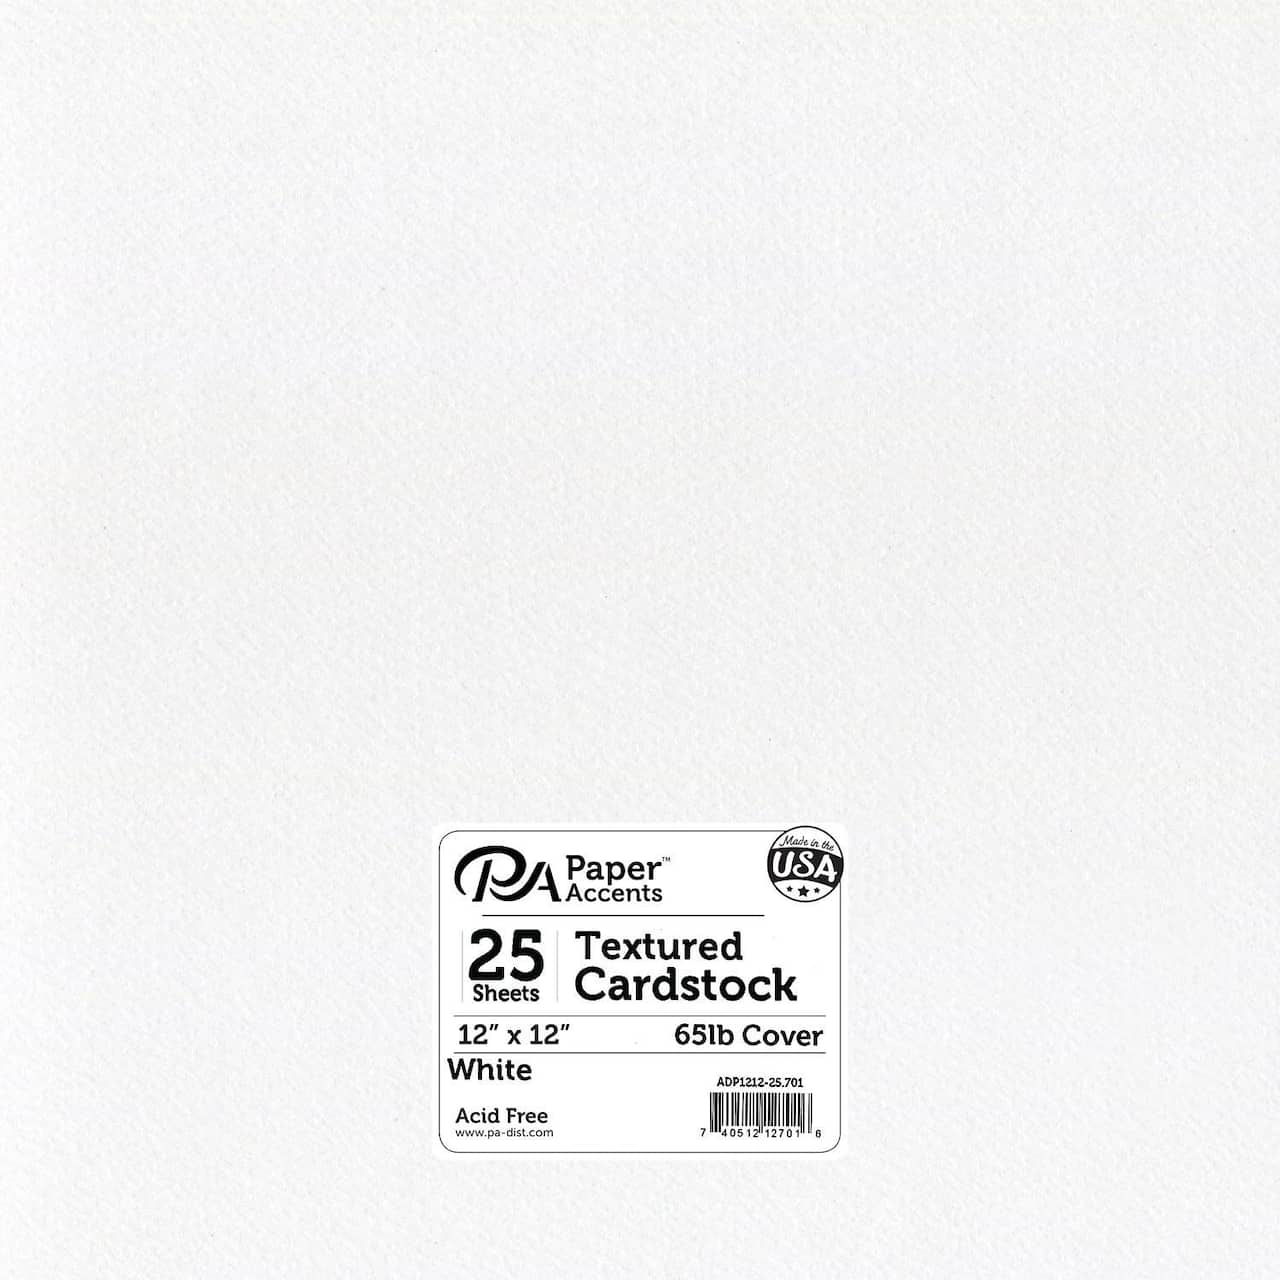 PA Paper™ Accents White 12 x 12 65lb. Textured Cardstock, 25 Sheets